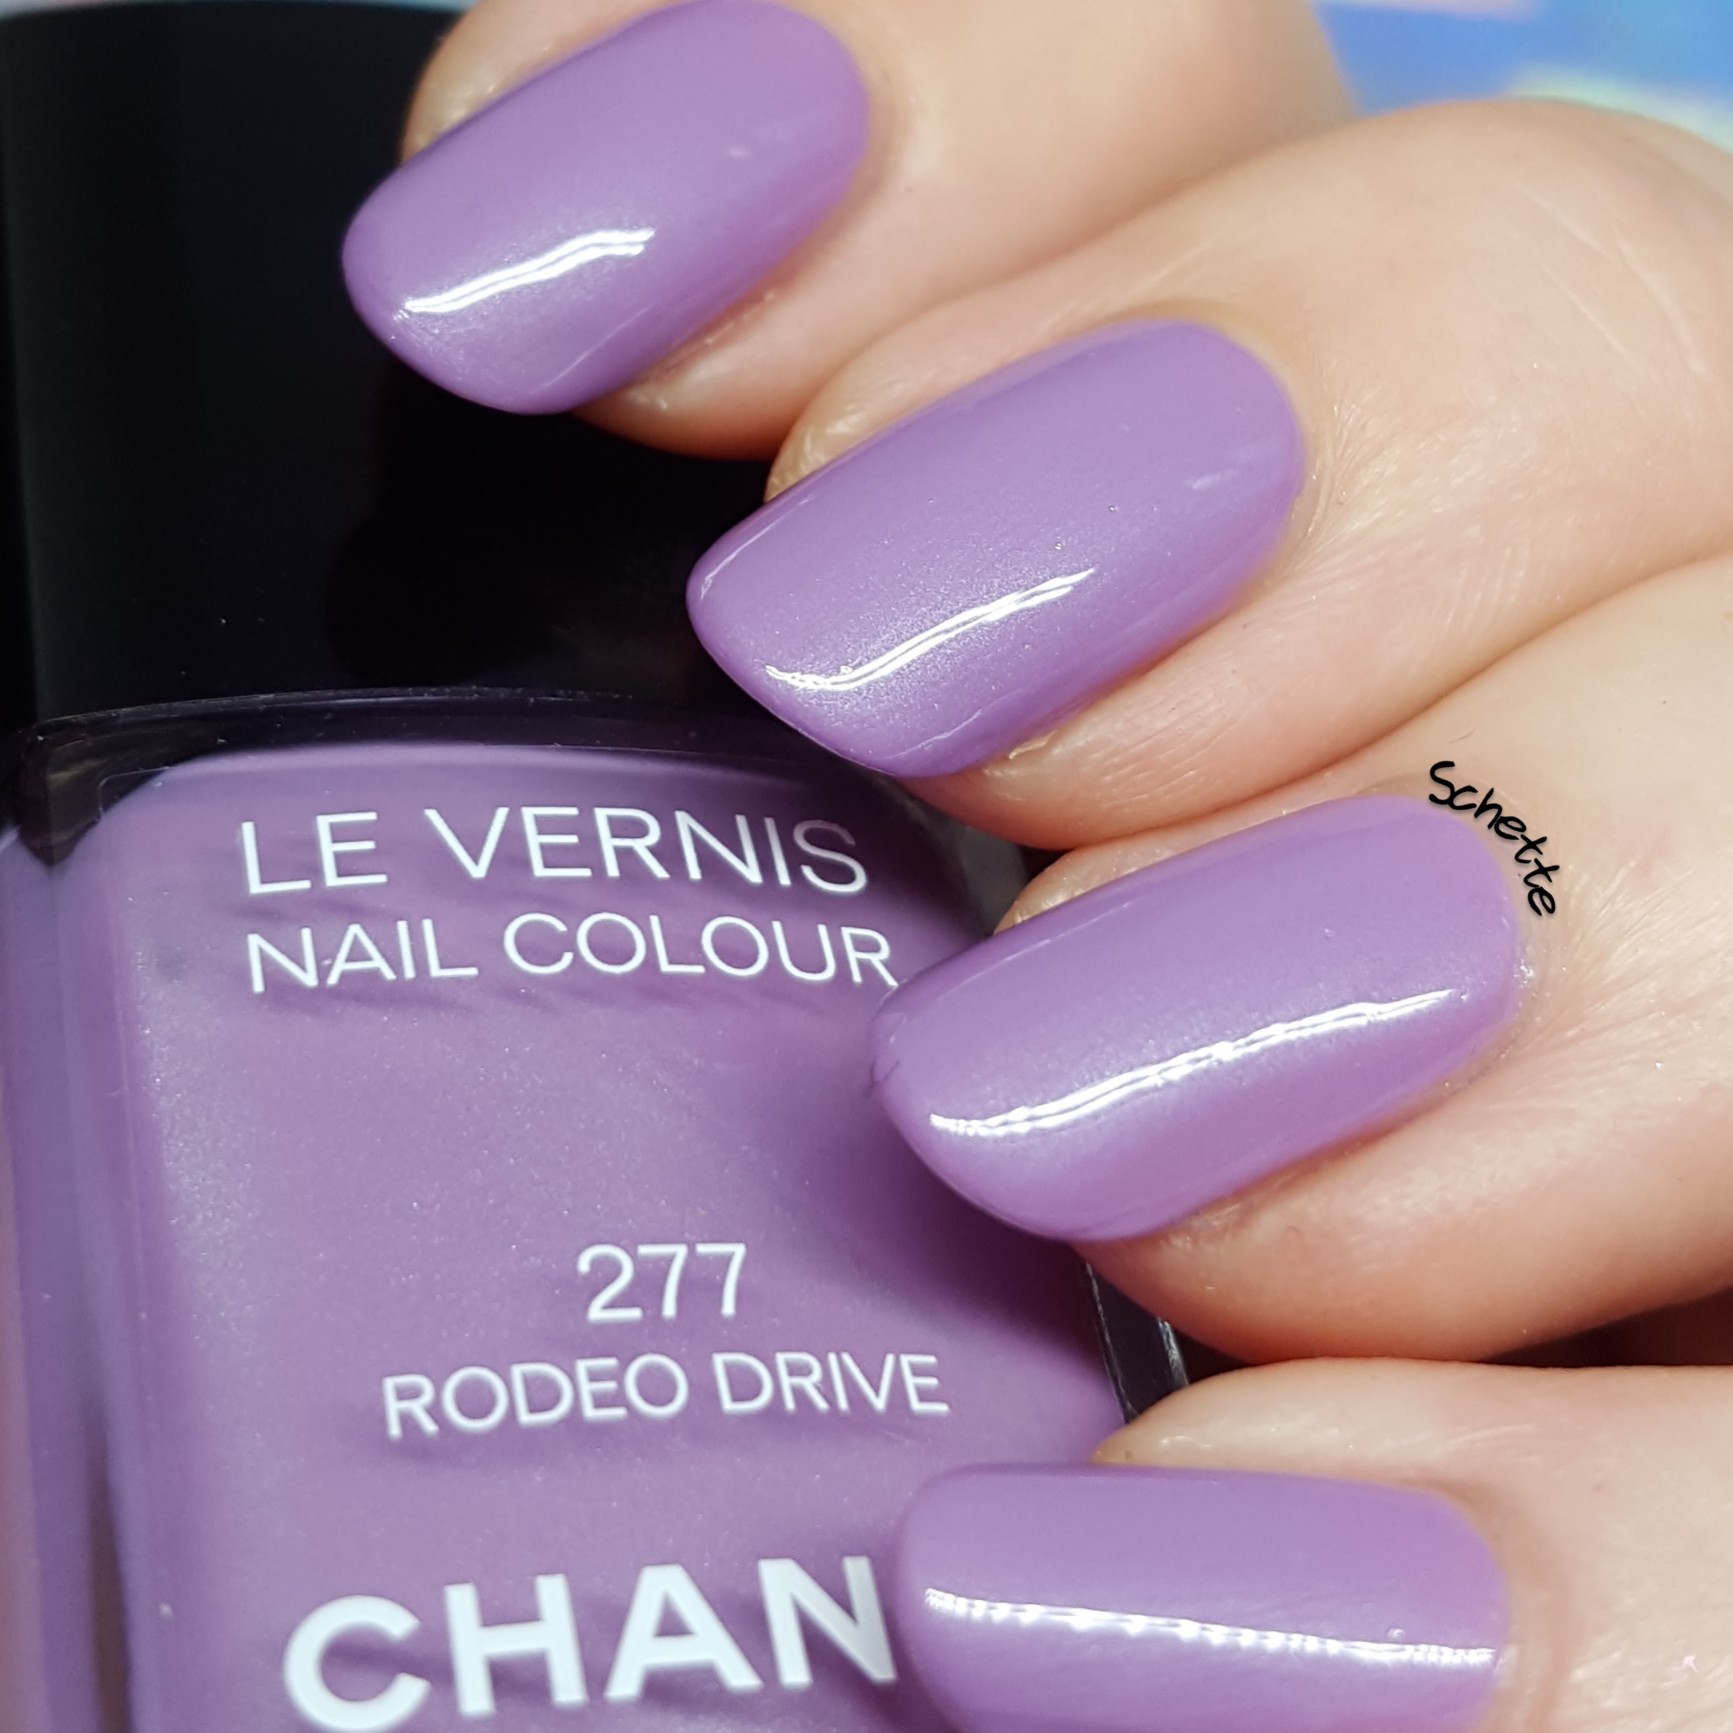 Chanel - Rodeo drive